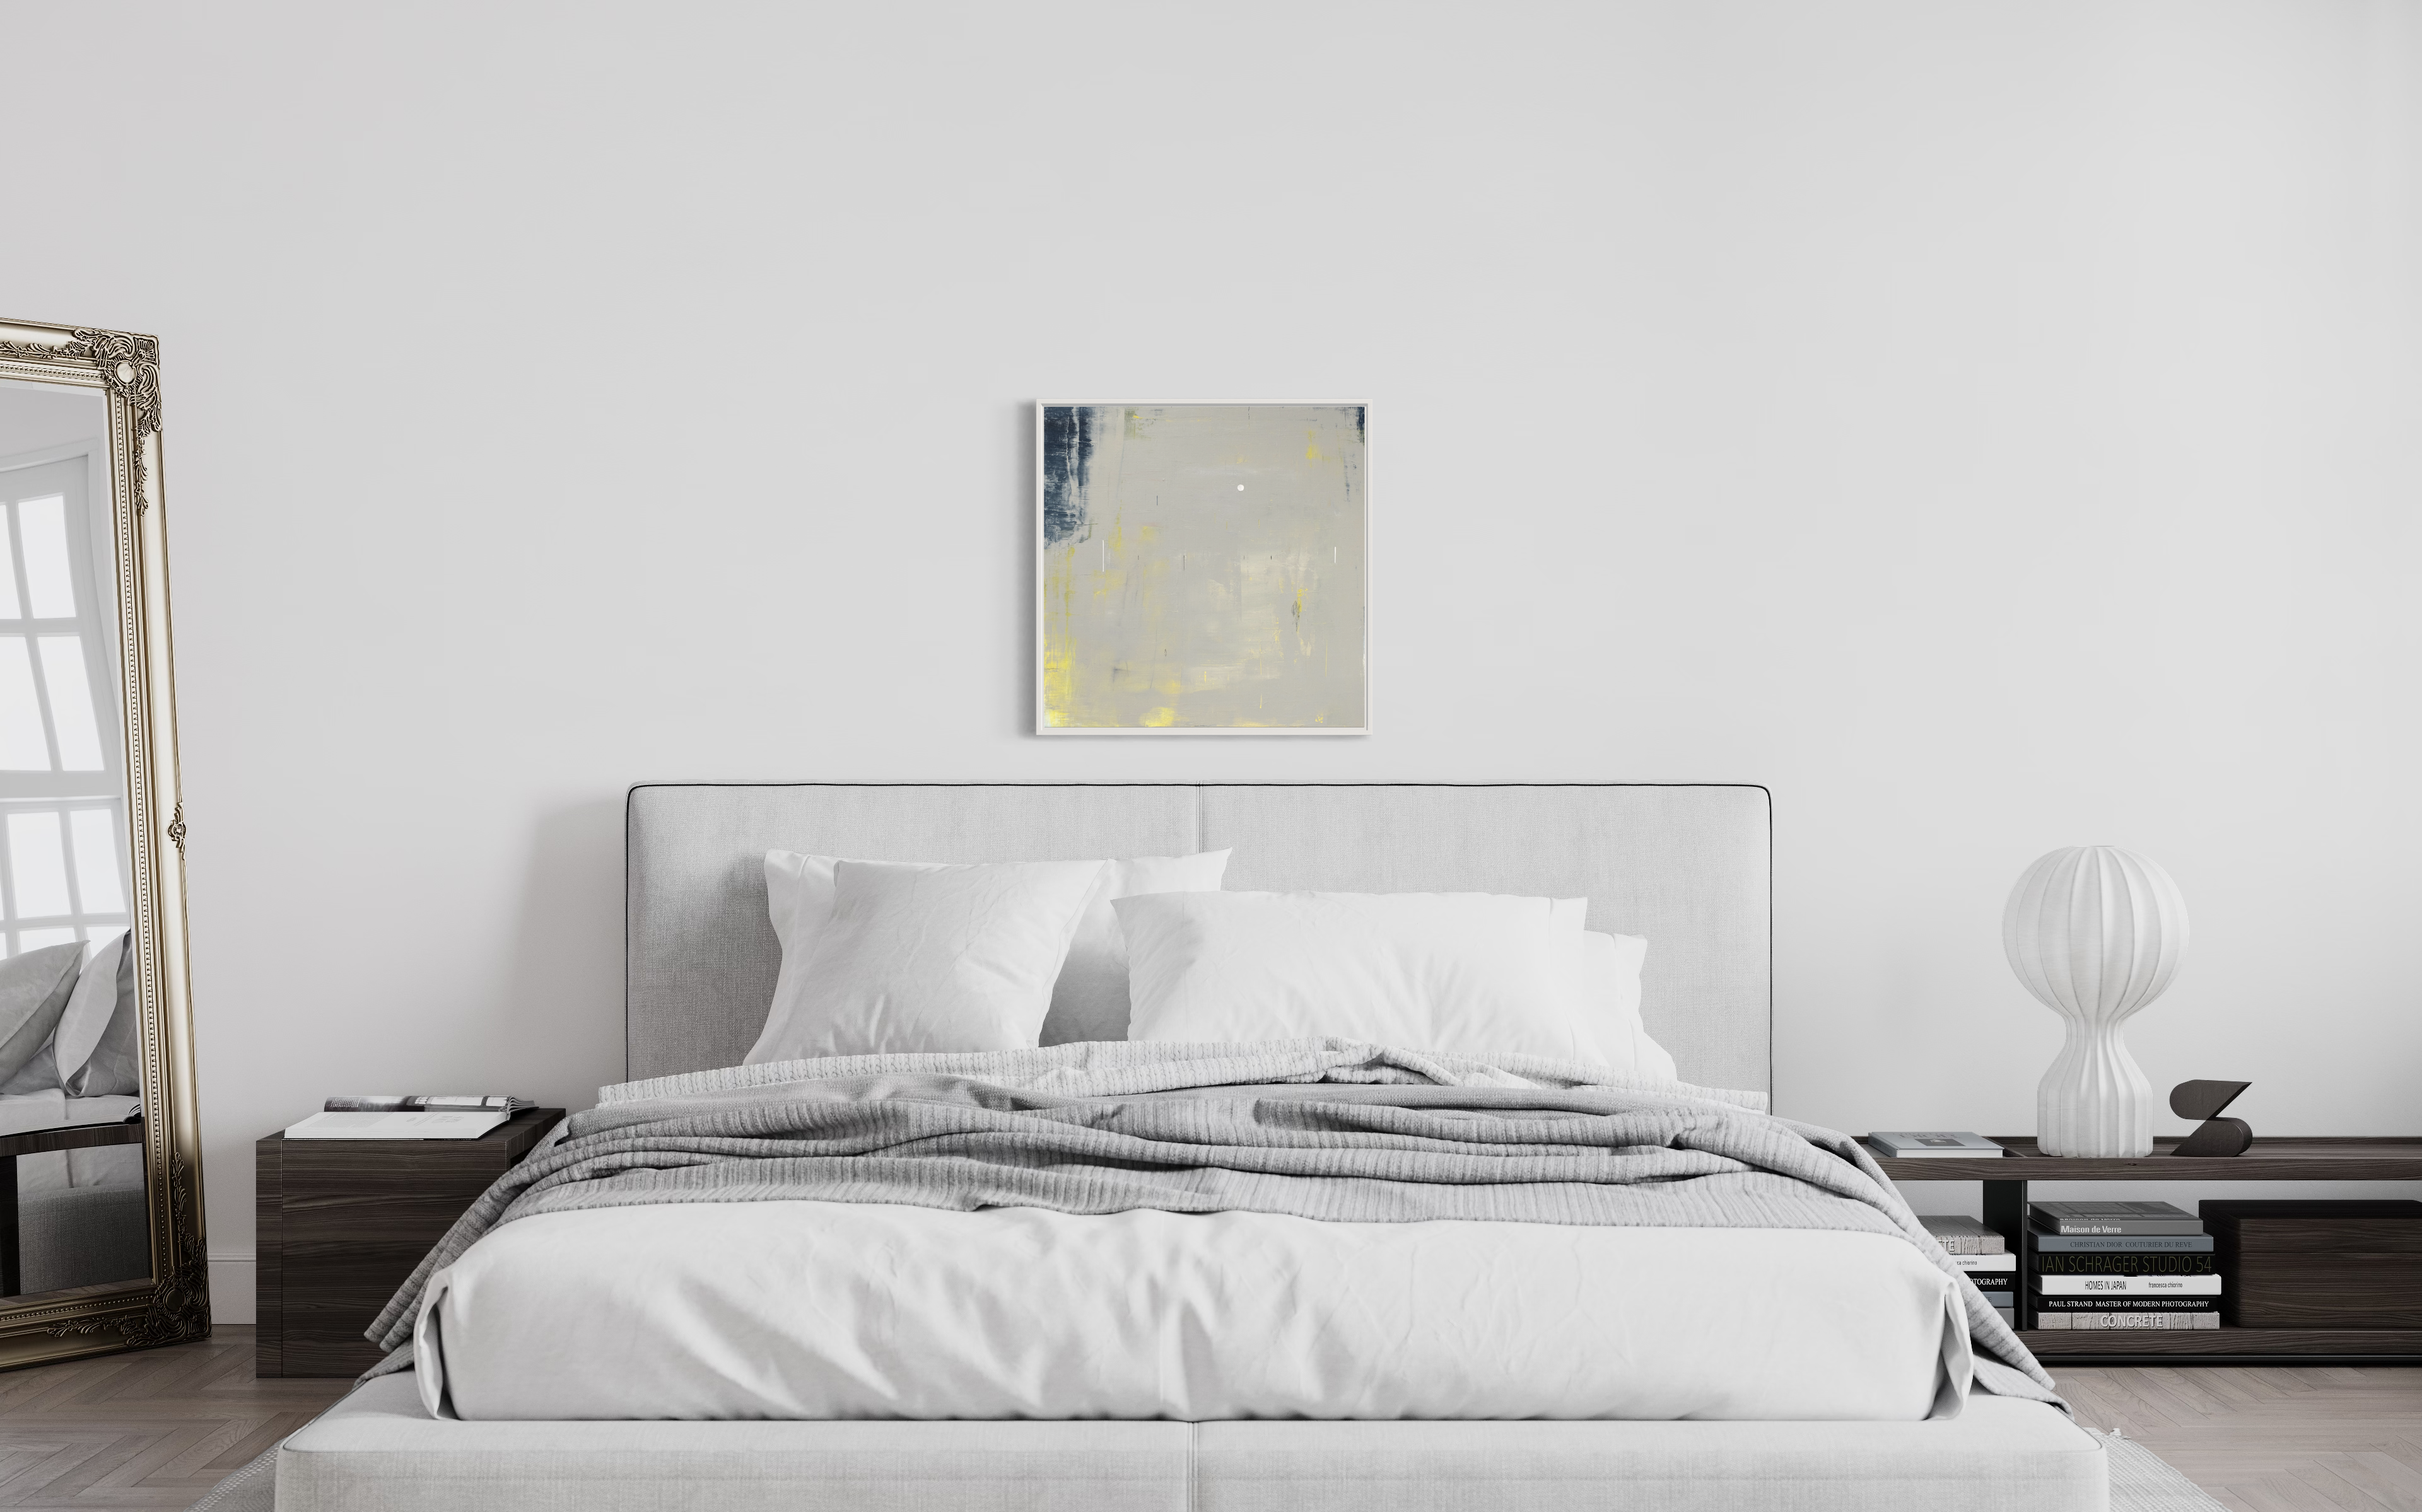 Moon Shadow painting by Janet Taylor hanging in a bedroom.